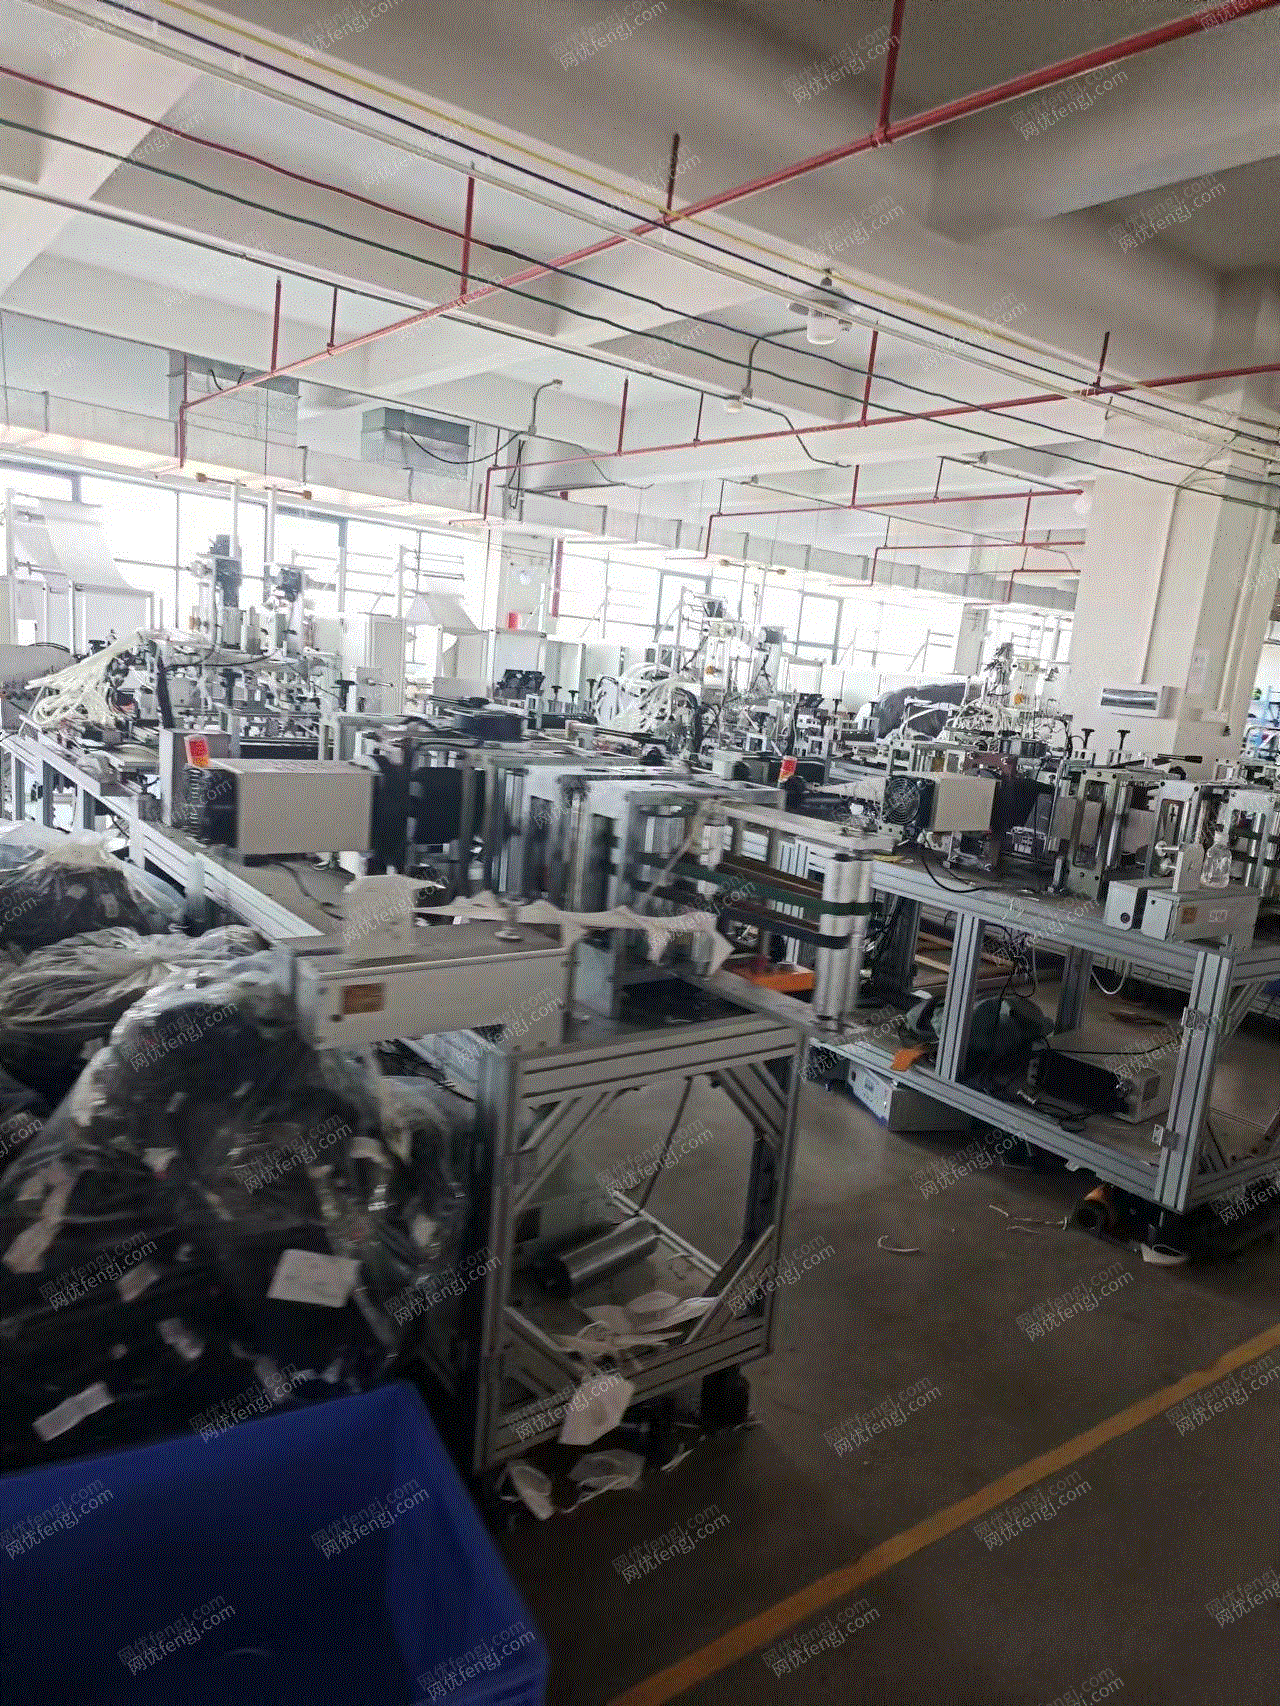 The whole plant recycles second-hand equipment such as circuit board plant, electroplating plant and copper sink wire